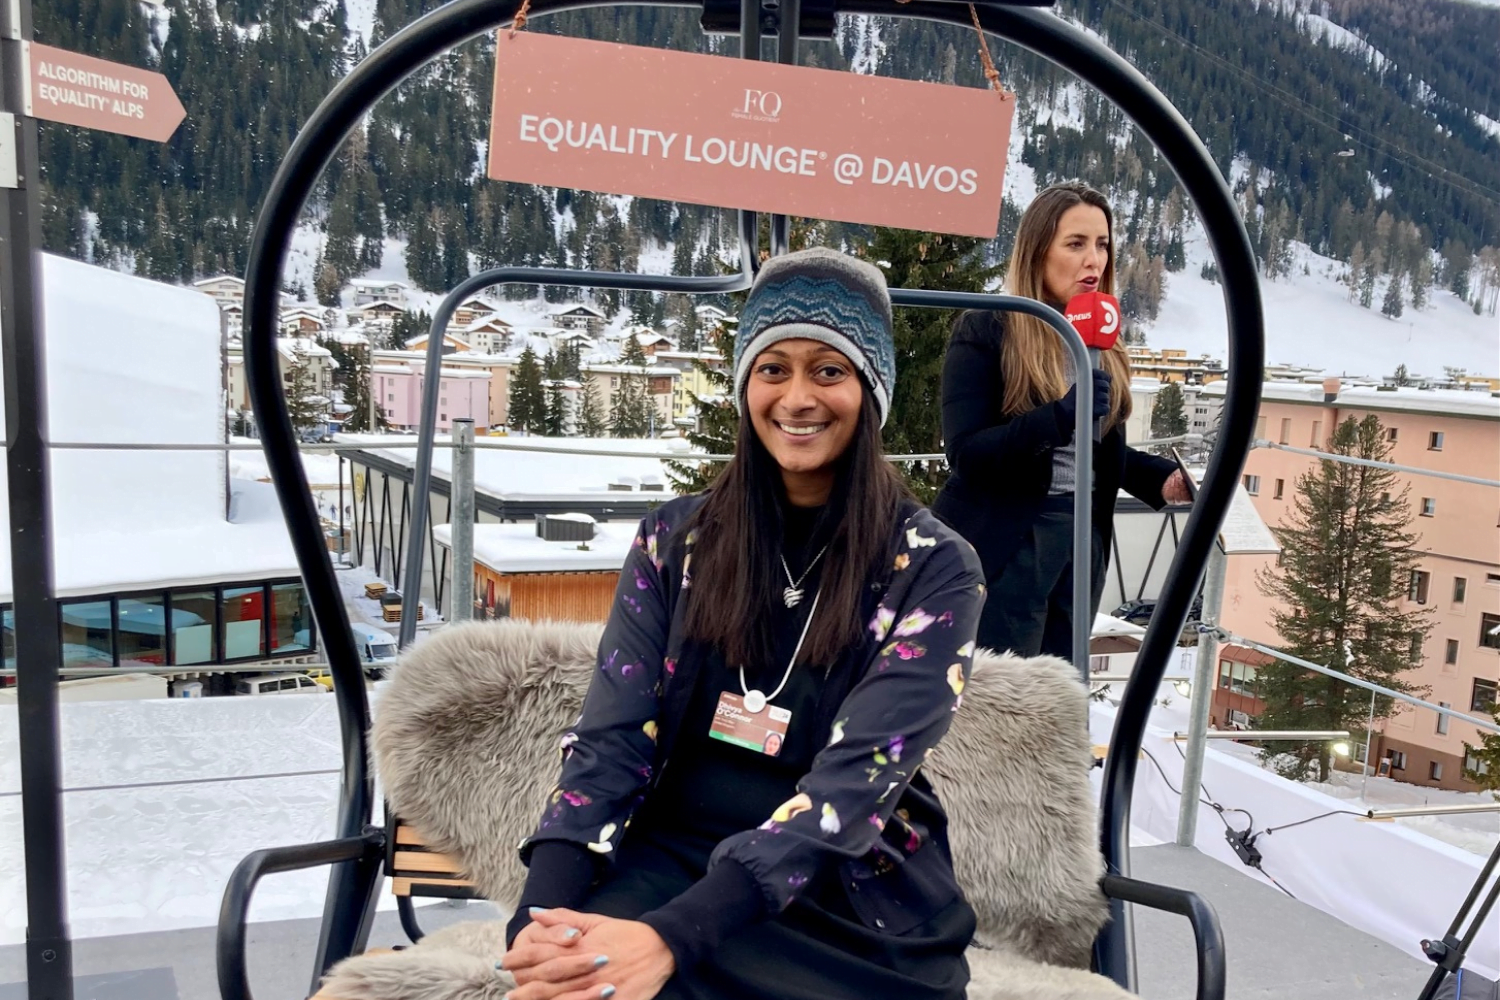 Dhivya O'Connor at Davos with mountains in the background.